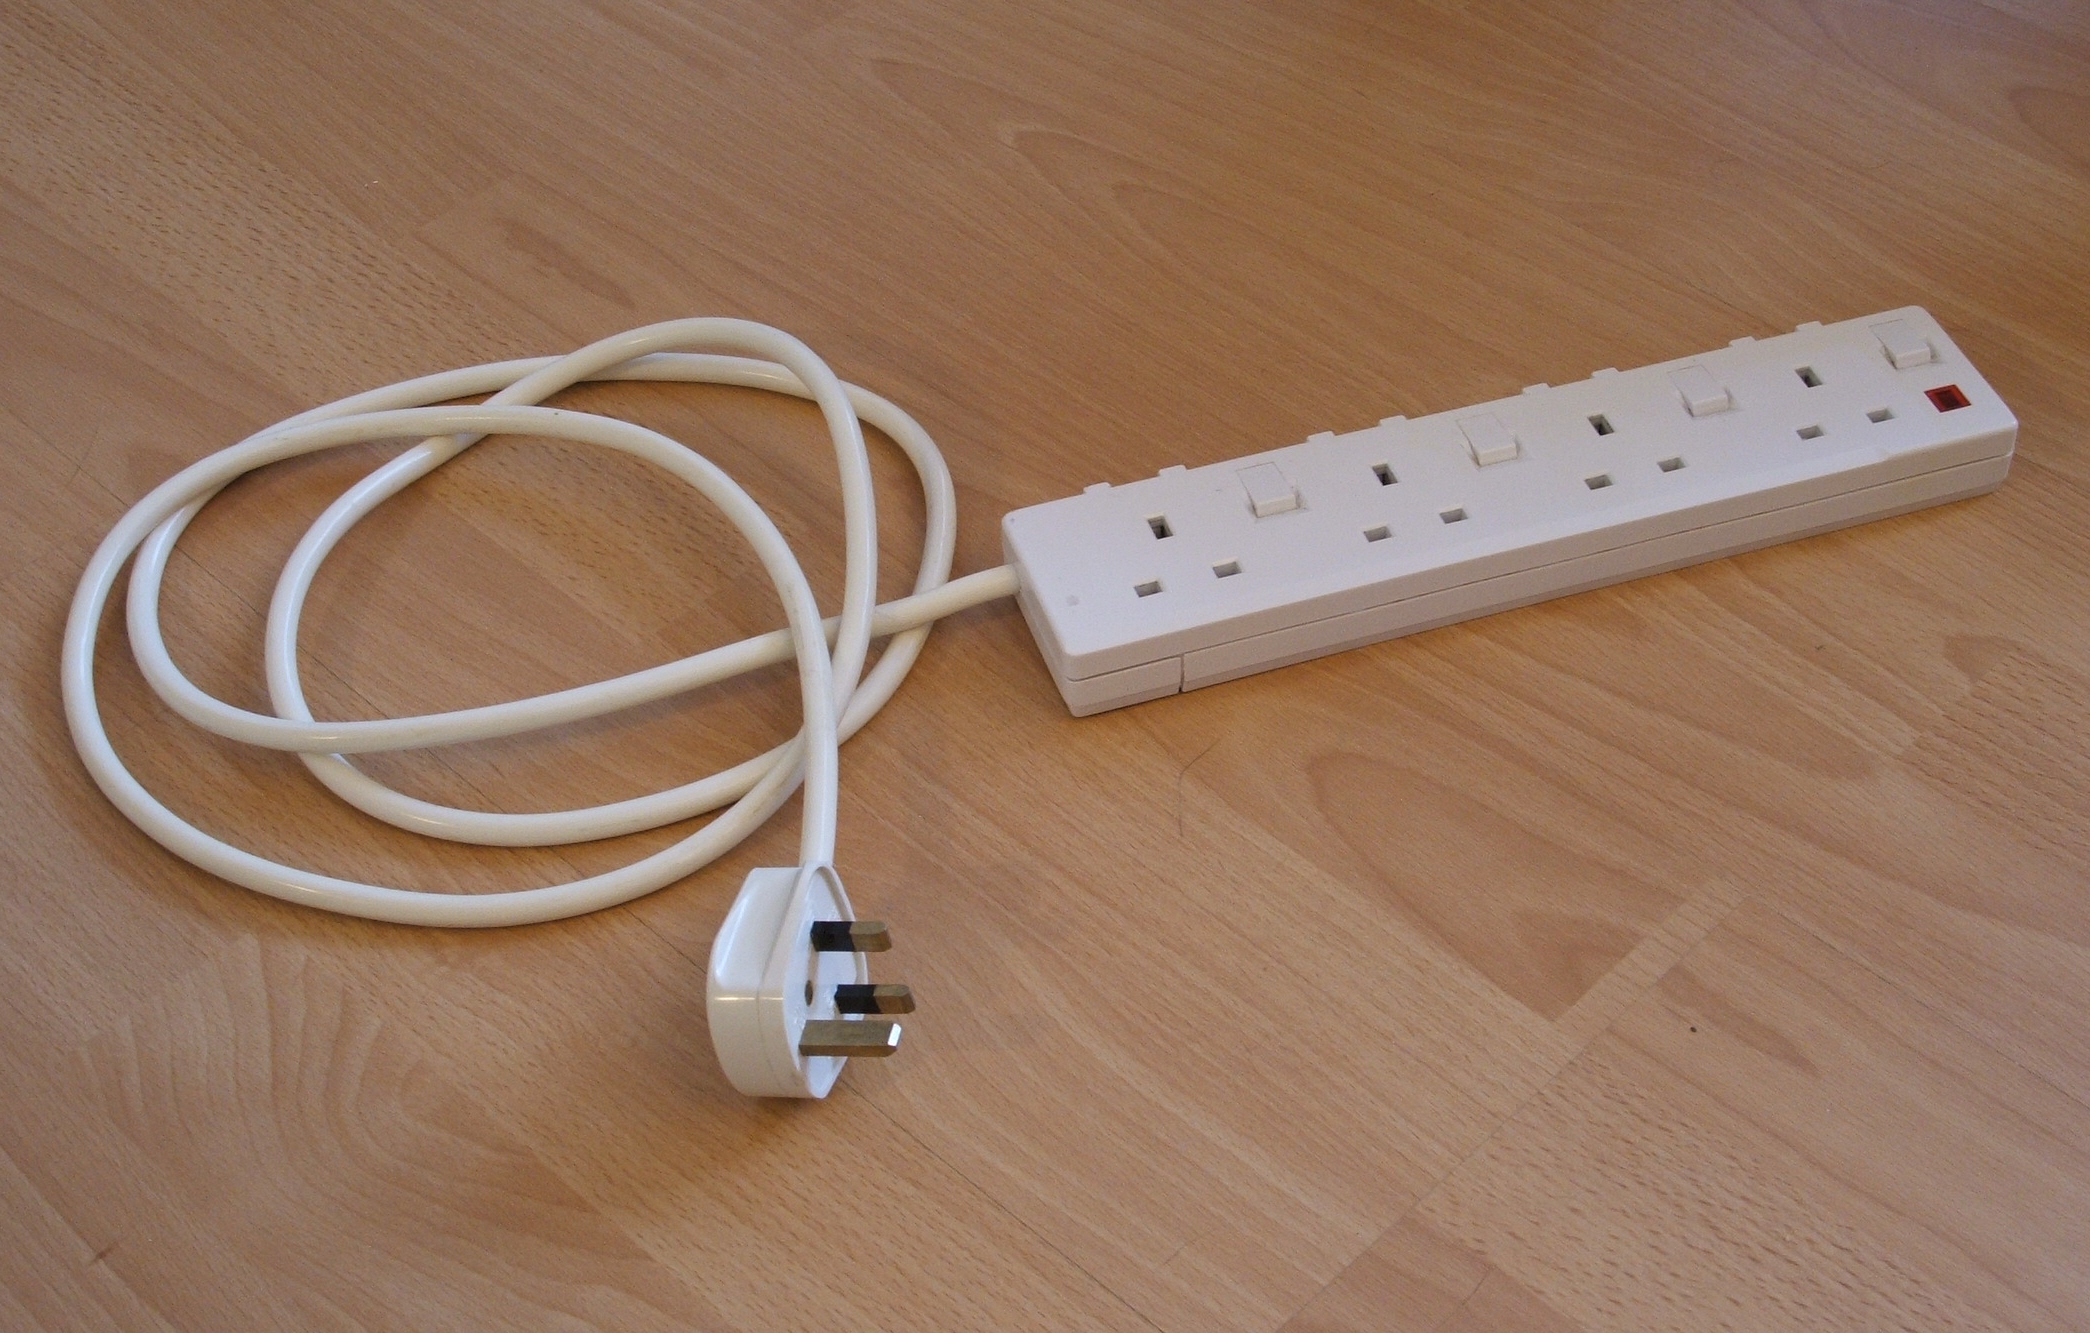 Extension Cord Safety, Extension Cord Do's and Don'ts